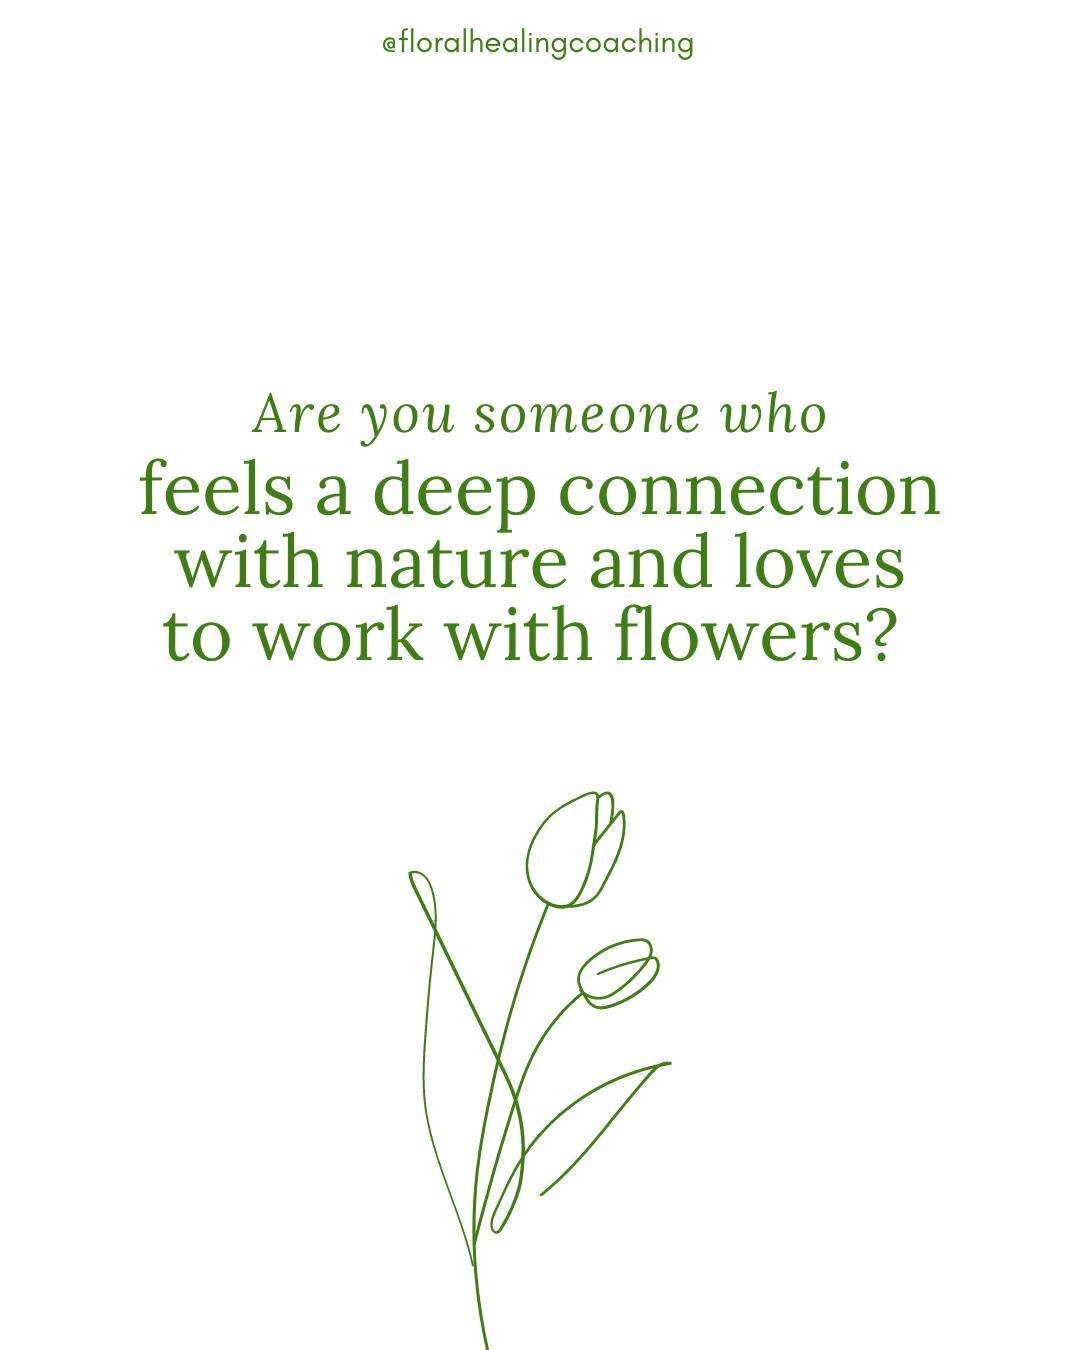 Turn your love of flowers into a fulfilling career 🌷 Join the Floral Healing Certification Program now: https://floralhealingcoaching.com/coaching

This program will teach you how to utilize fresh flowers, mindfulness and wellness tools to promote h